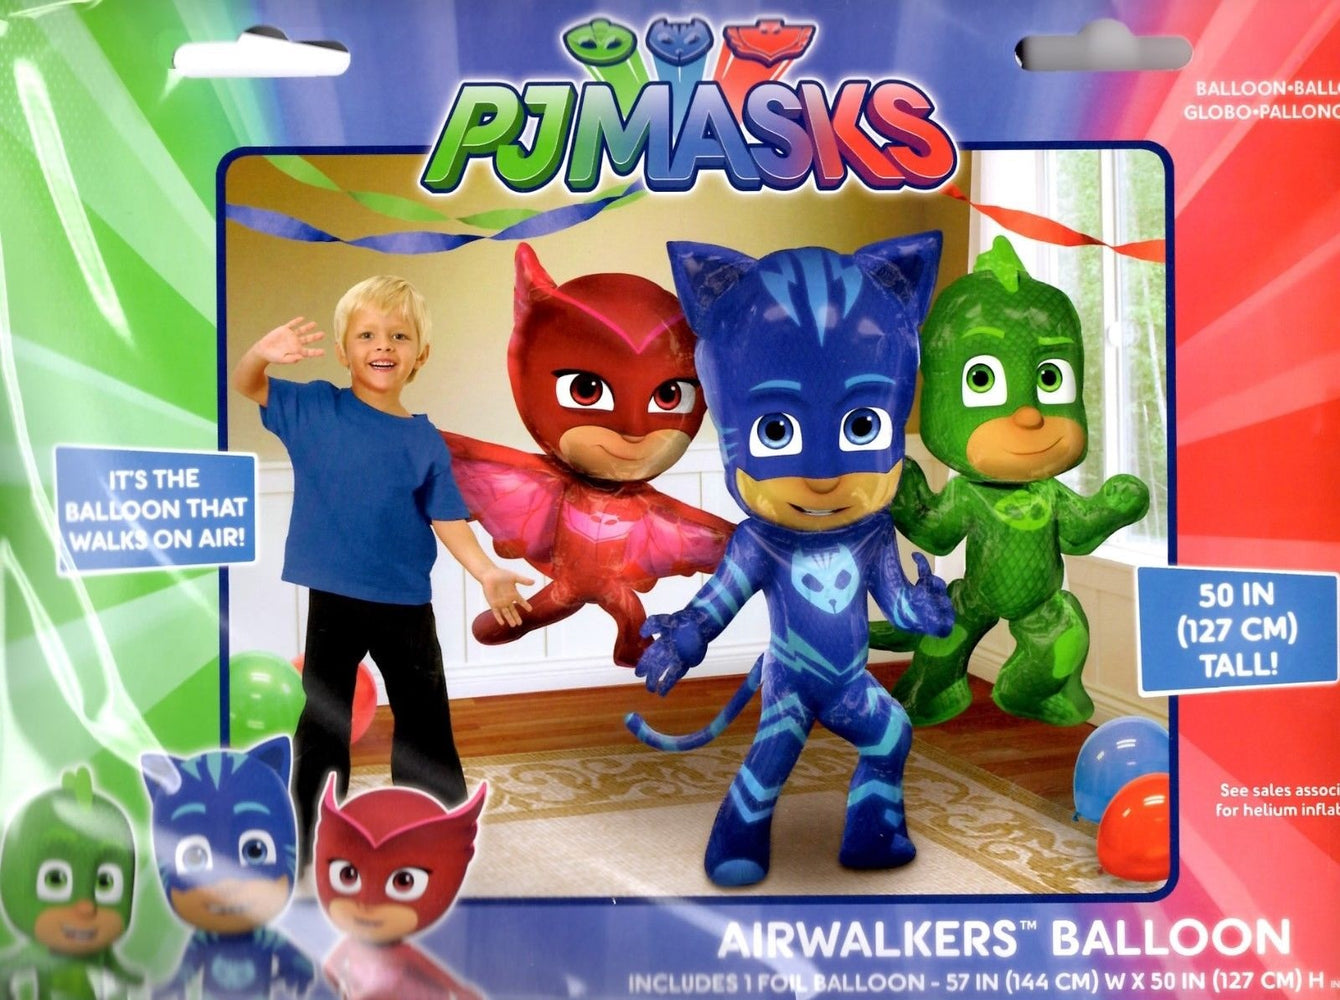 One Giant Pjmasks Airwalker 57" IN W X 50" IN H" Birthday Party Jumbo Balloon HELIUM NOT INCLUDED